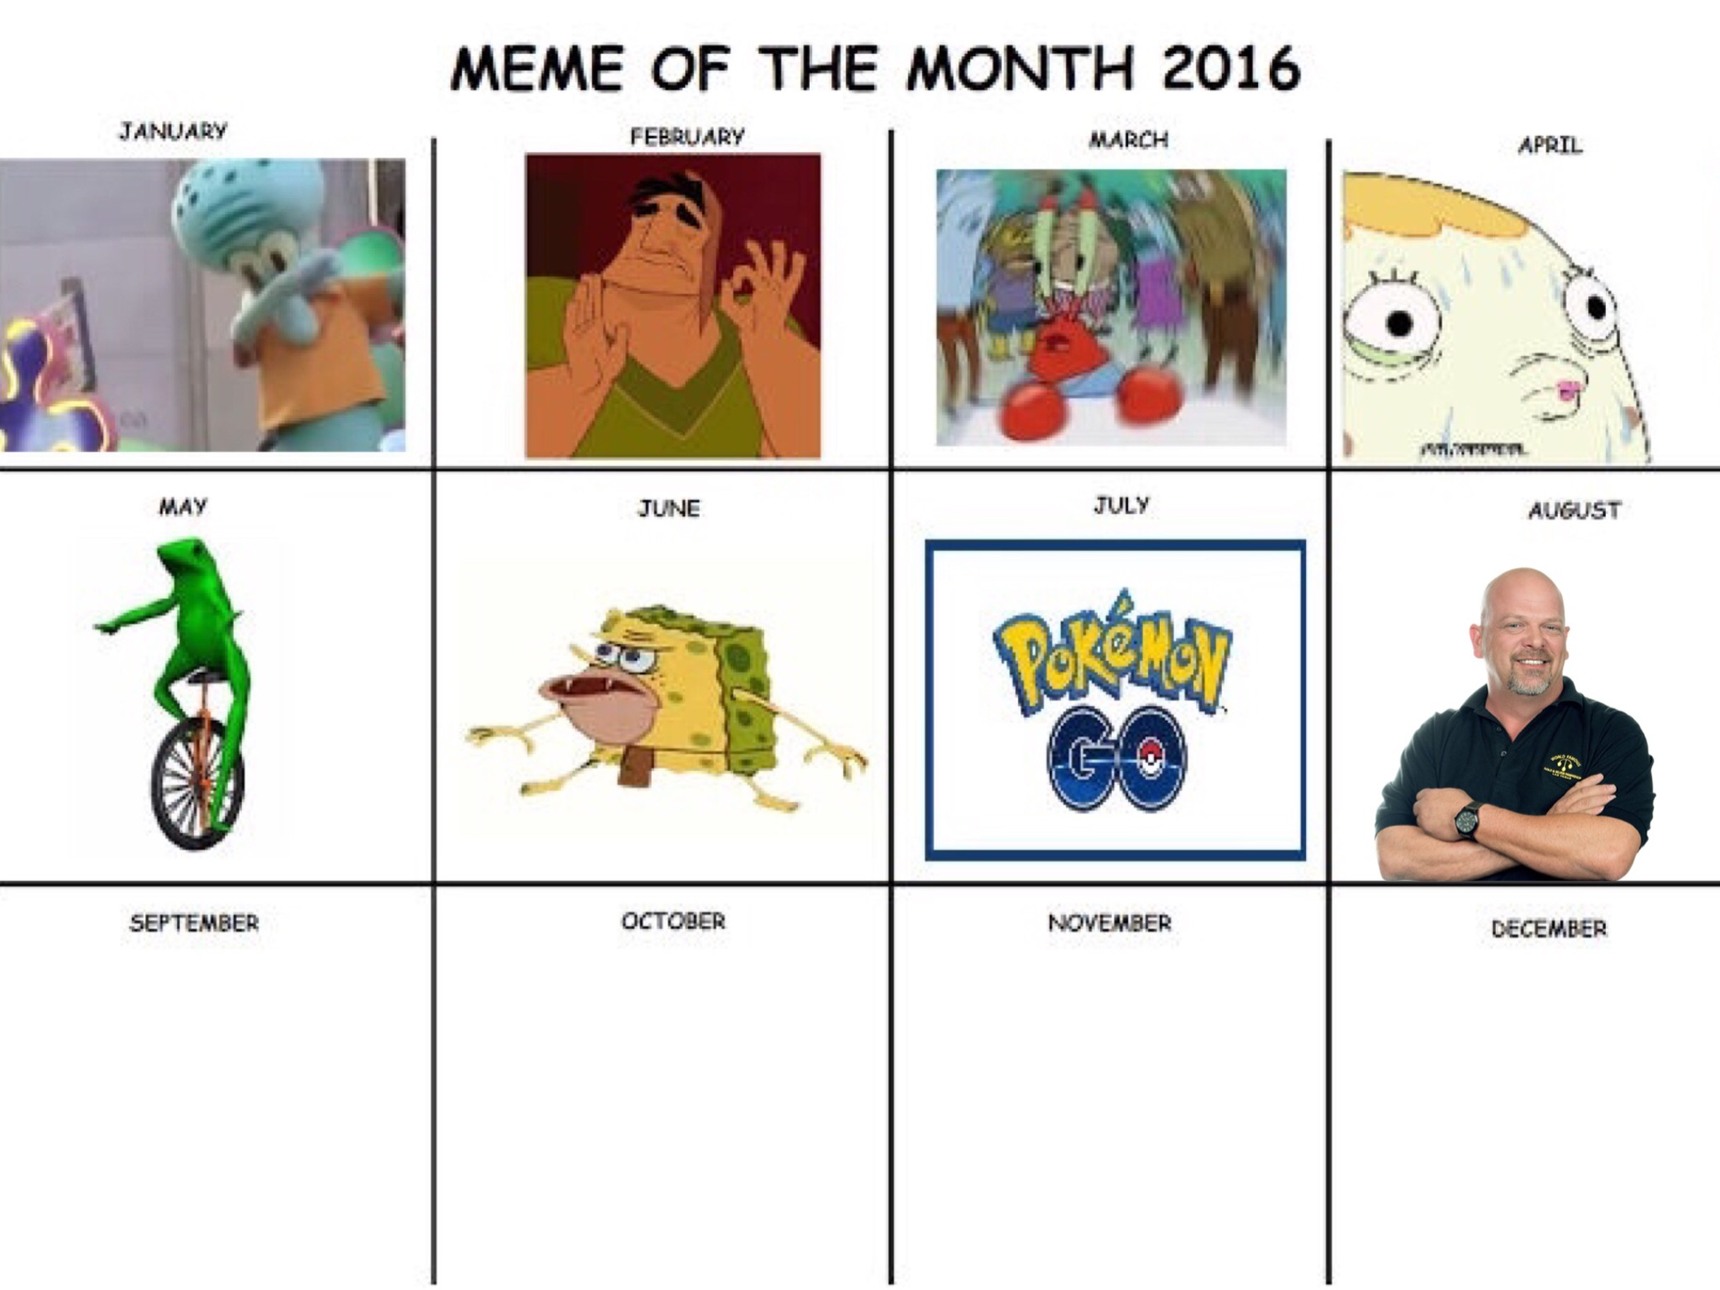 You never know what's gonna come in that month - meme